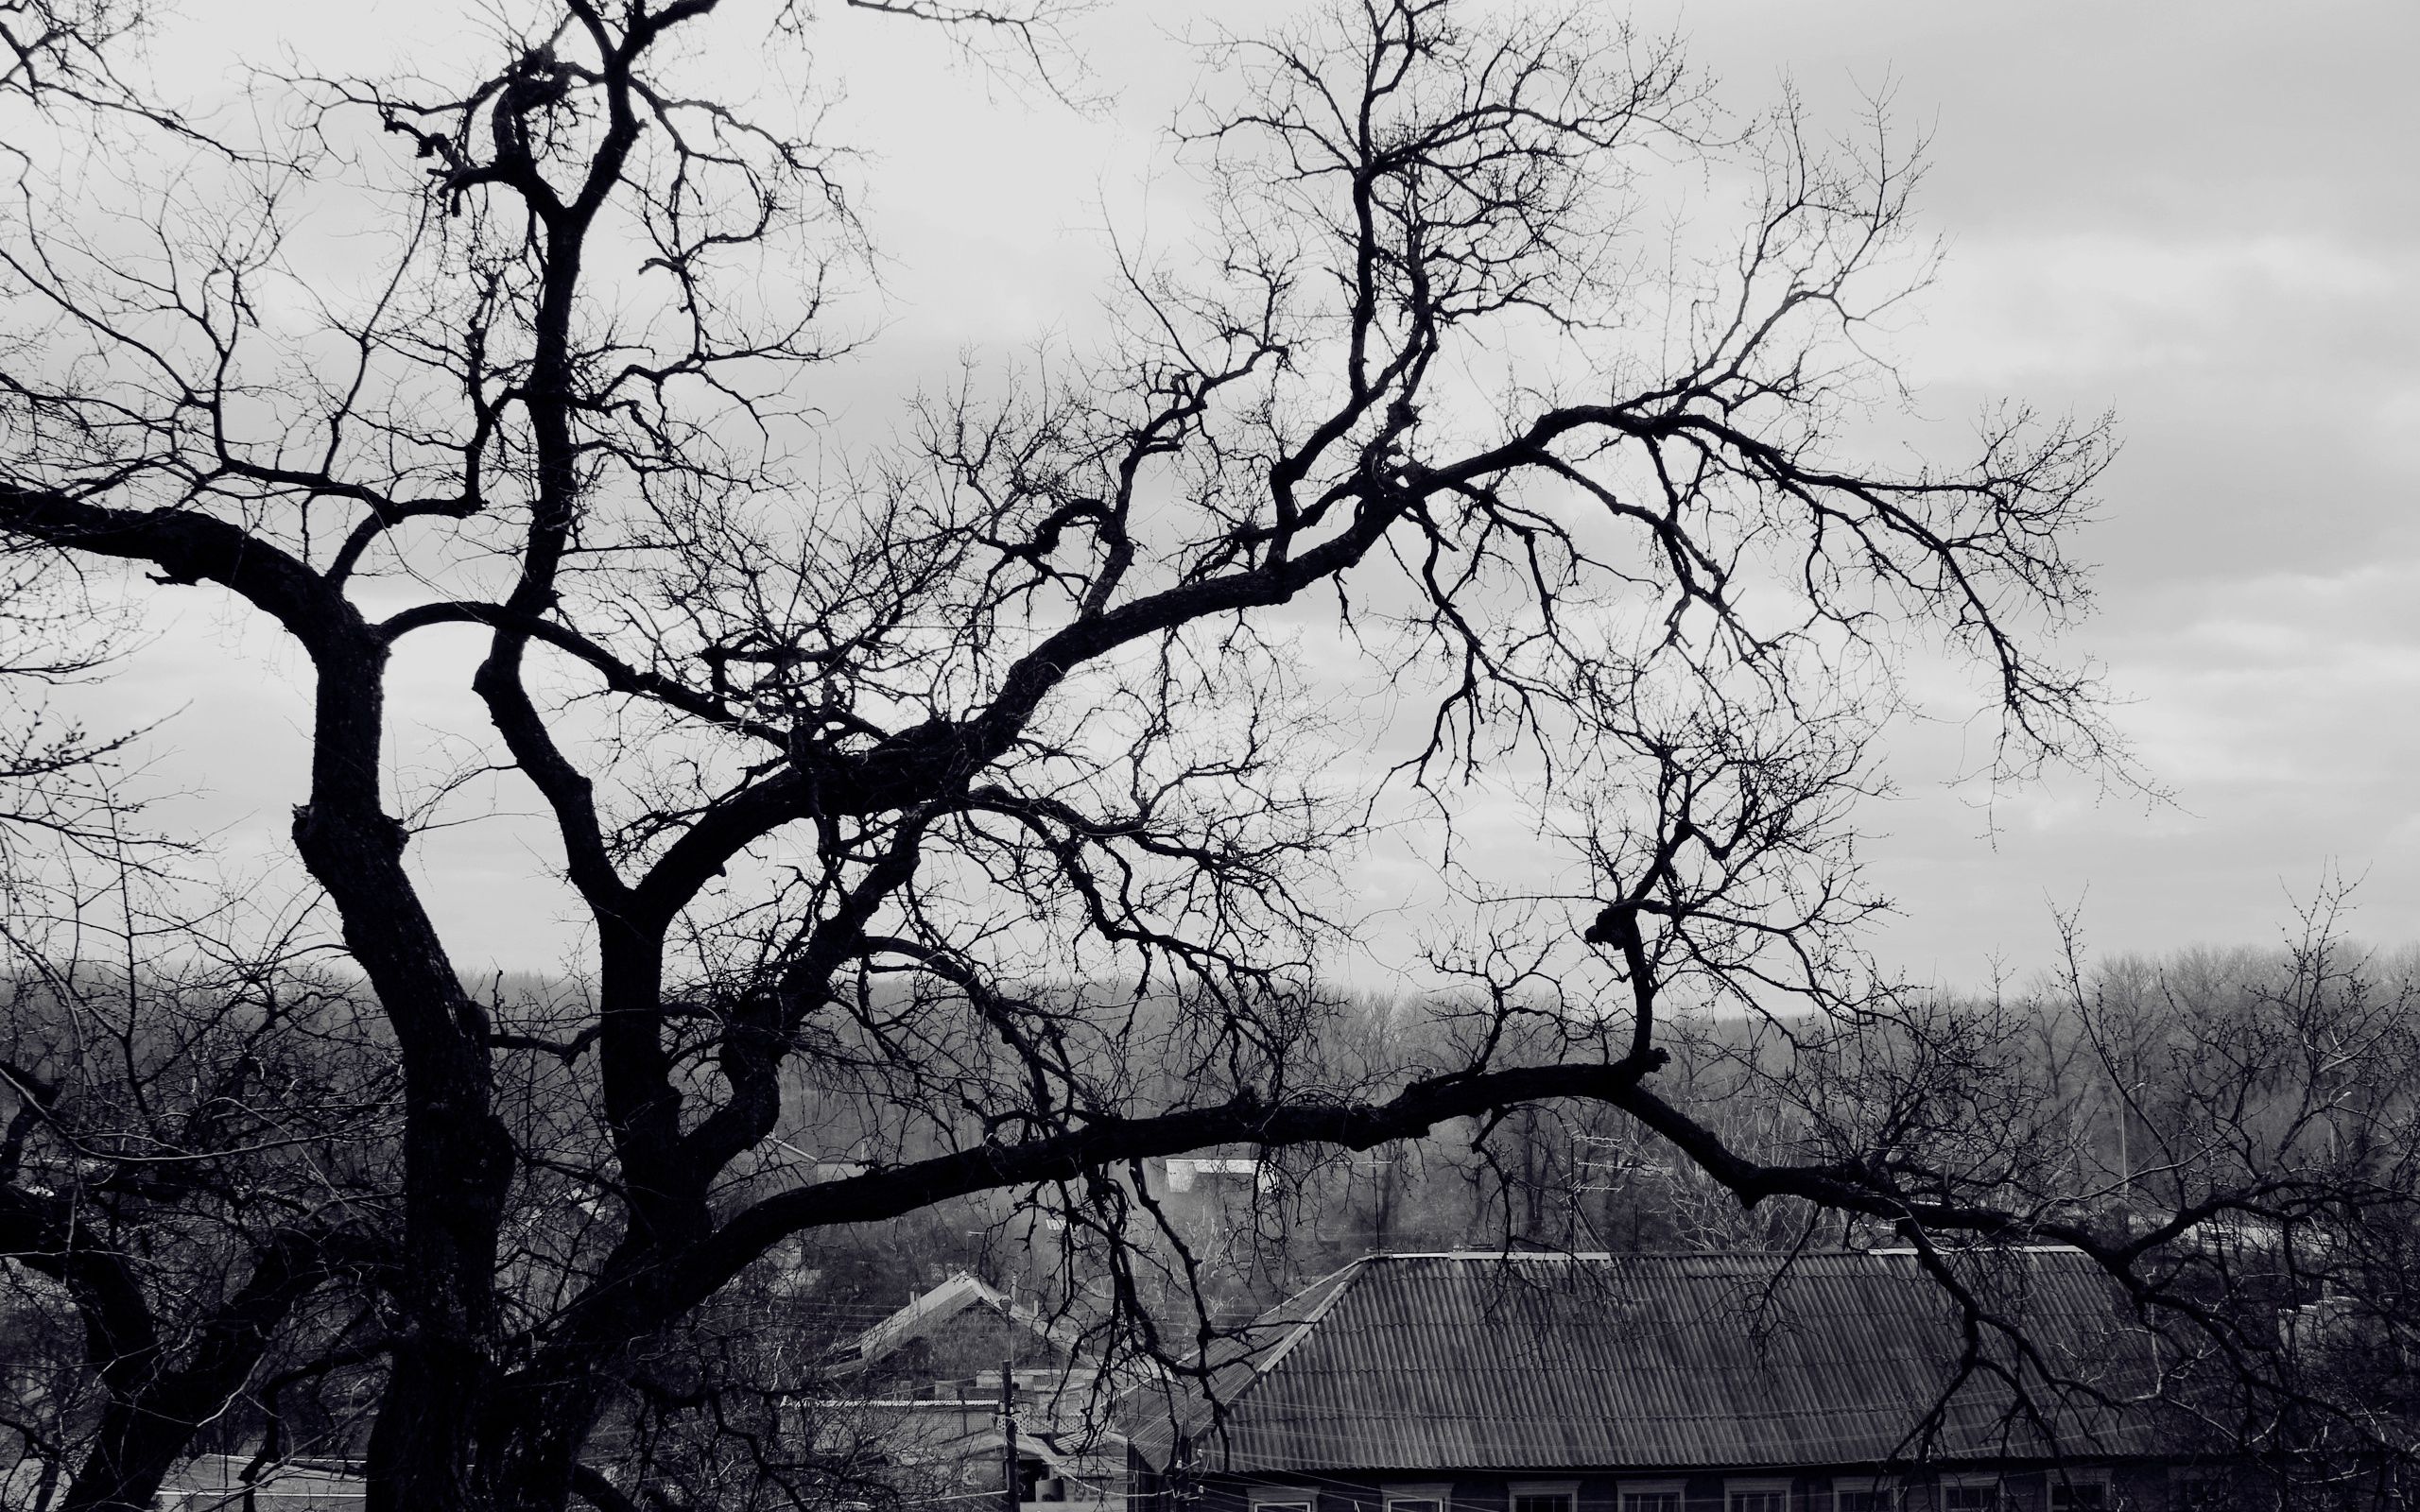 creepy, black and white, nature, wood, tree, branches, branch, roof, gloomy